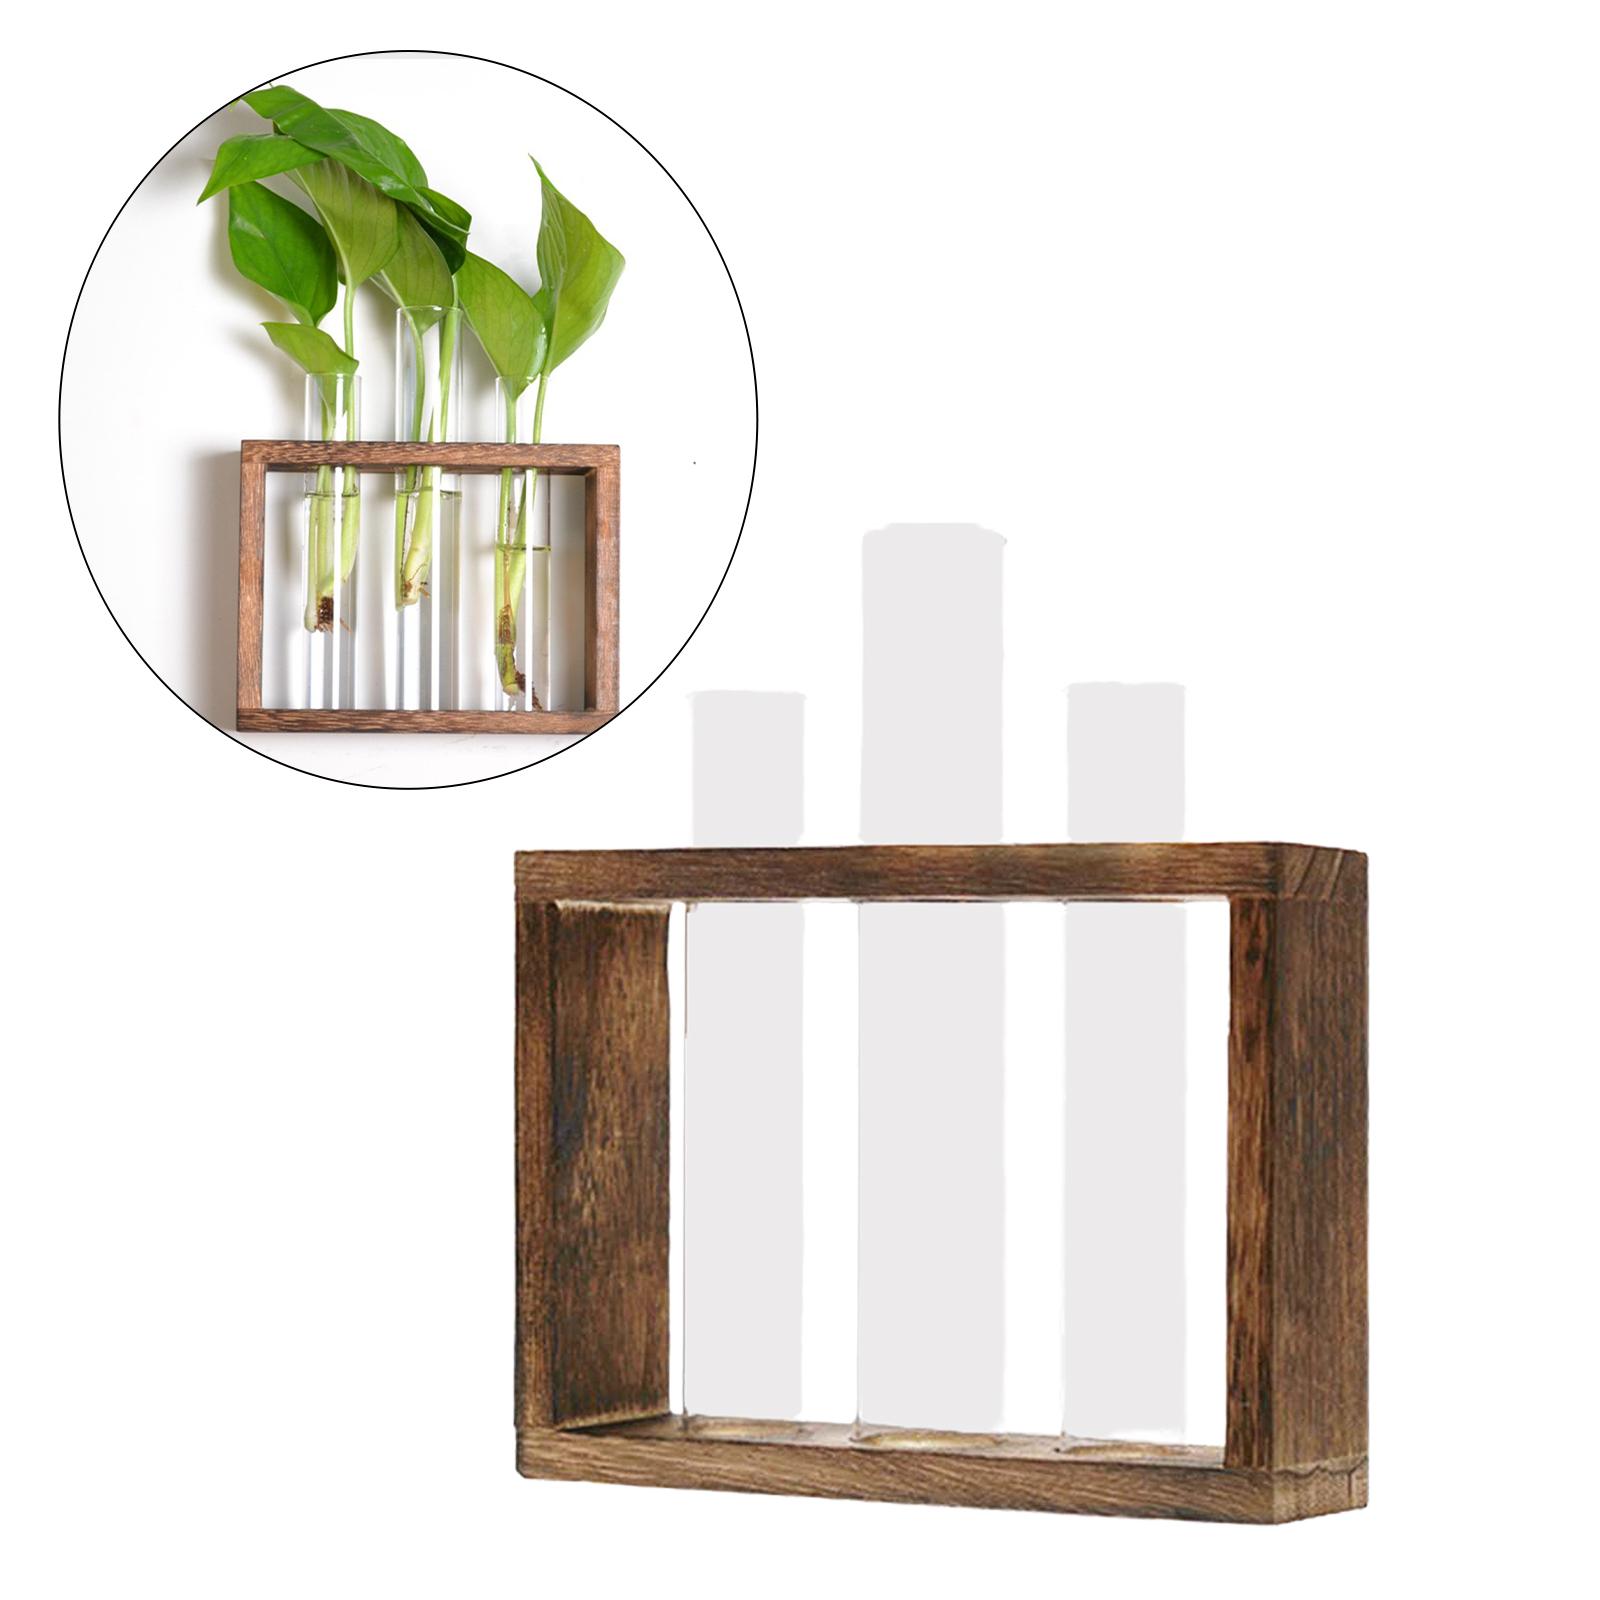 Test Tube Planter Modern Flower Bud Vase with Wood Stand 3 Test Tube Small